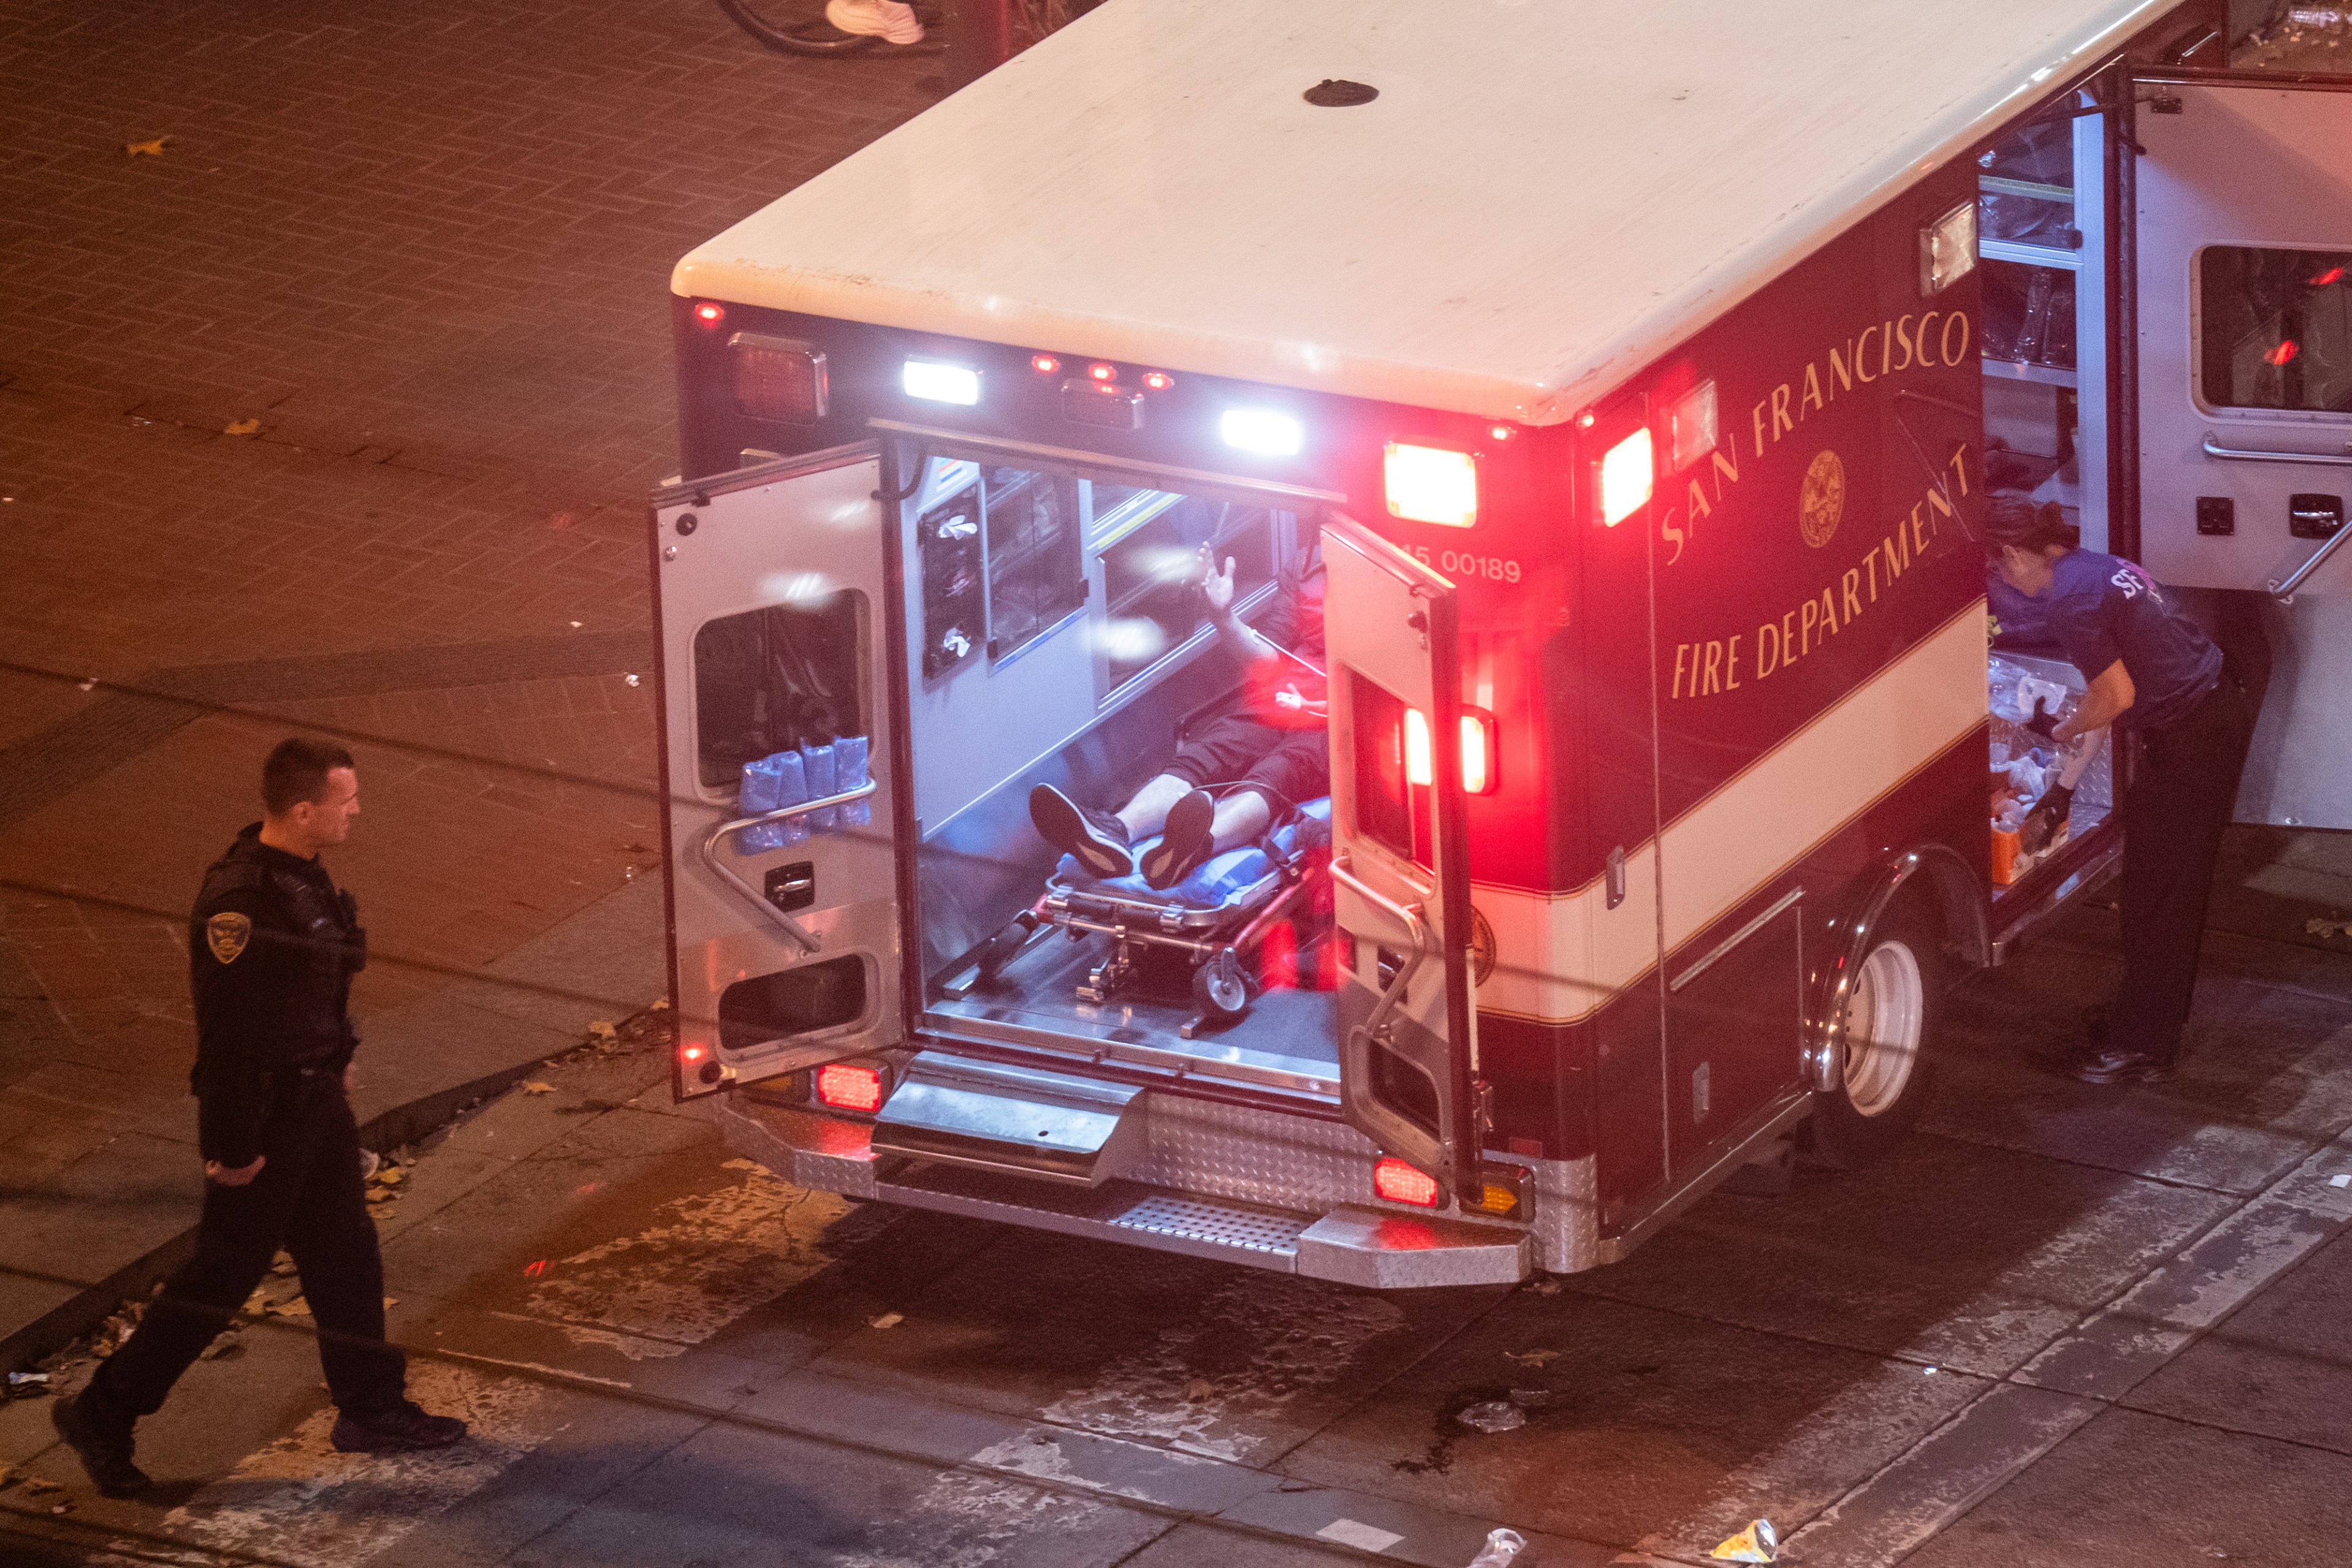 A person lies in an ambulance. Their face is out of frame.